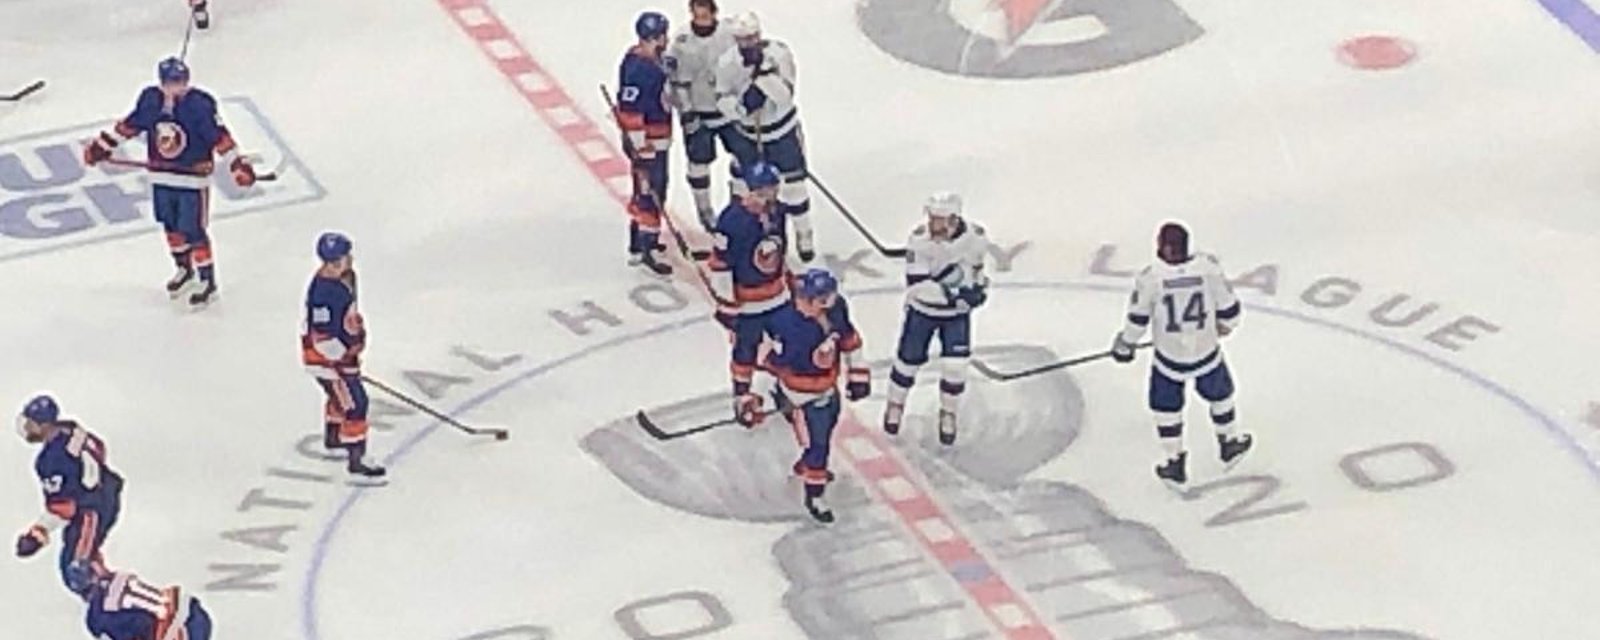 Things get heated between the Lightning and Islanders during warmup.